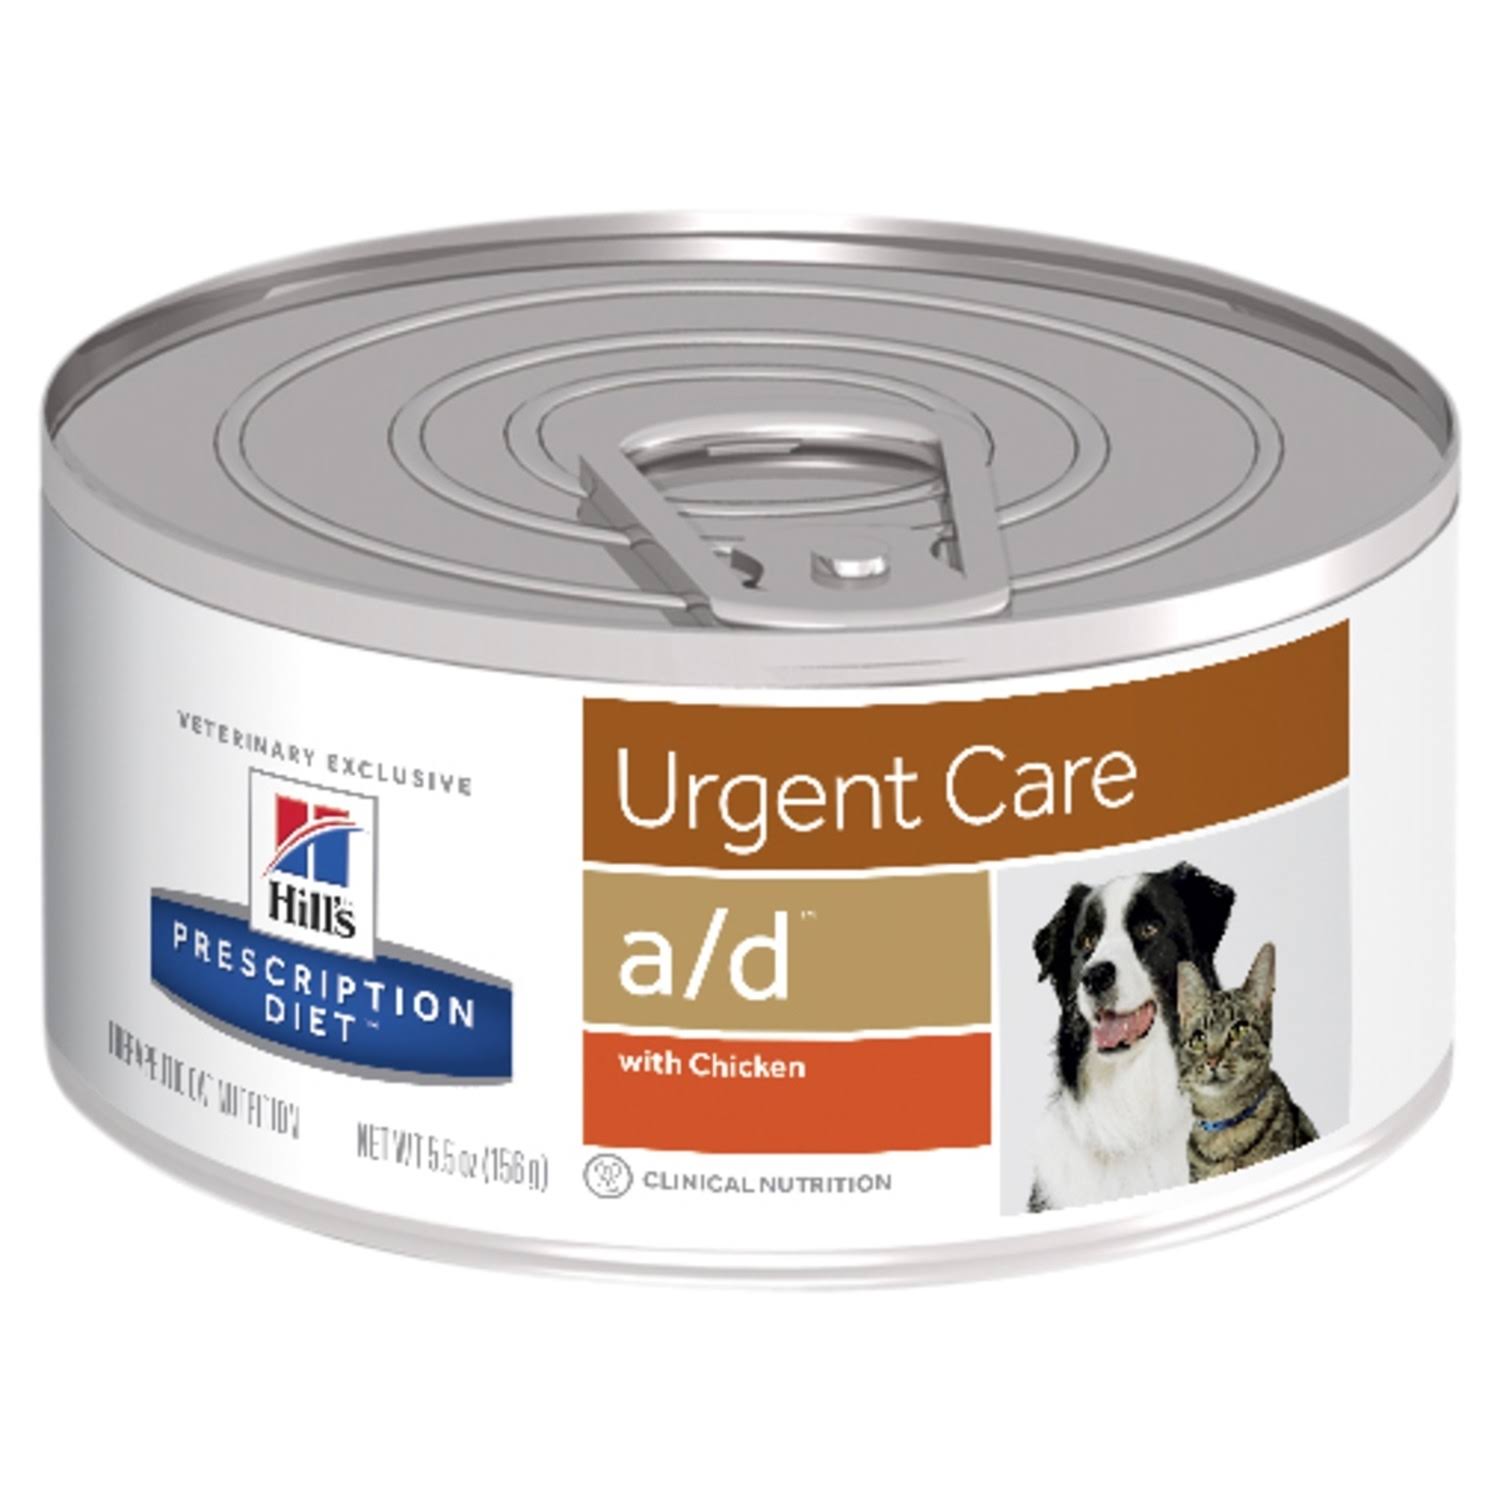 Hill's Prescription Diet A/d Urgent Care Canned Dog and Cat Food - 5.5oz